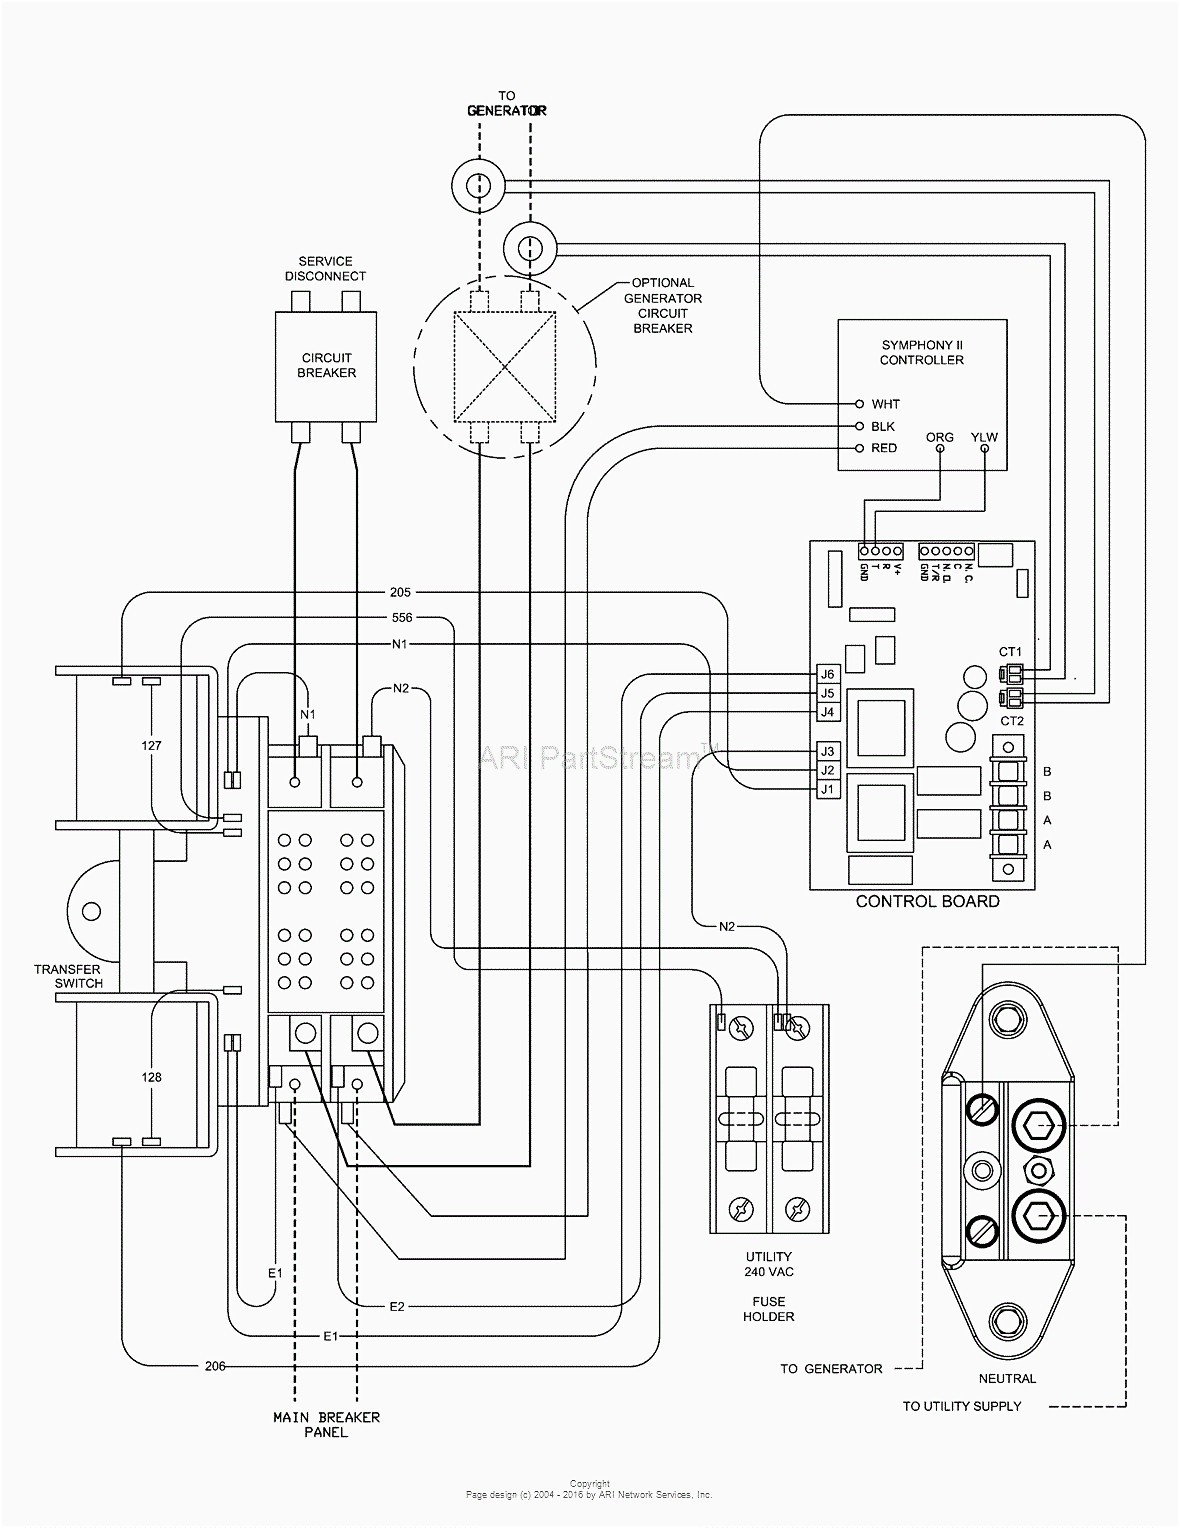 Generator Automatic Transfer Switch Wiring Diagram Generac With Fancy Briggs And